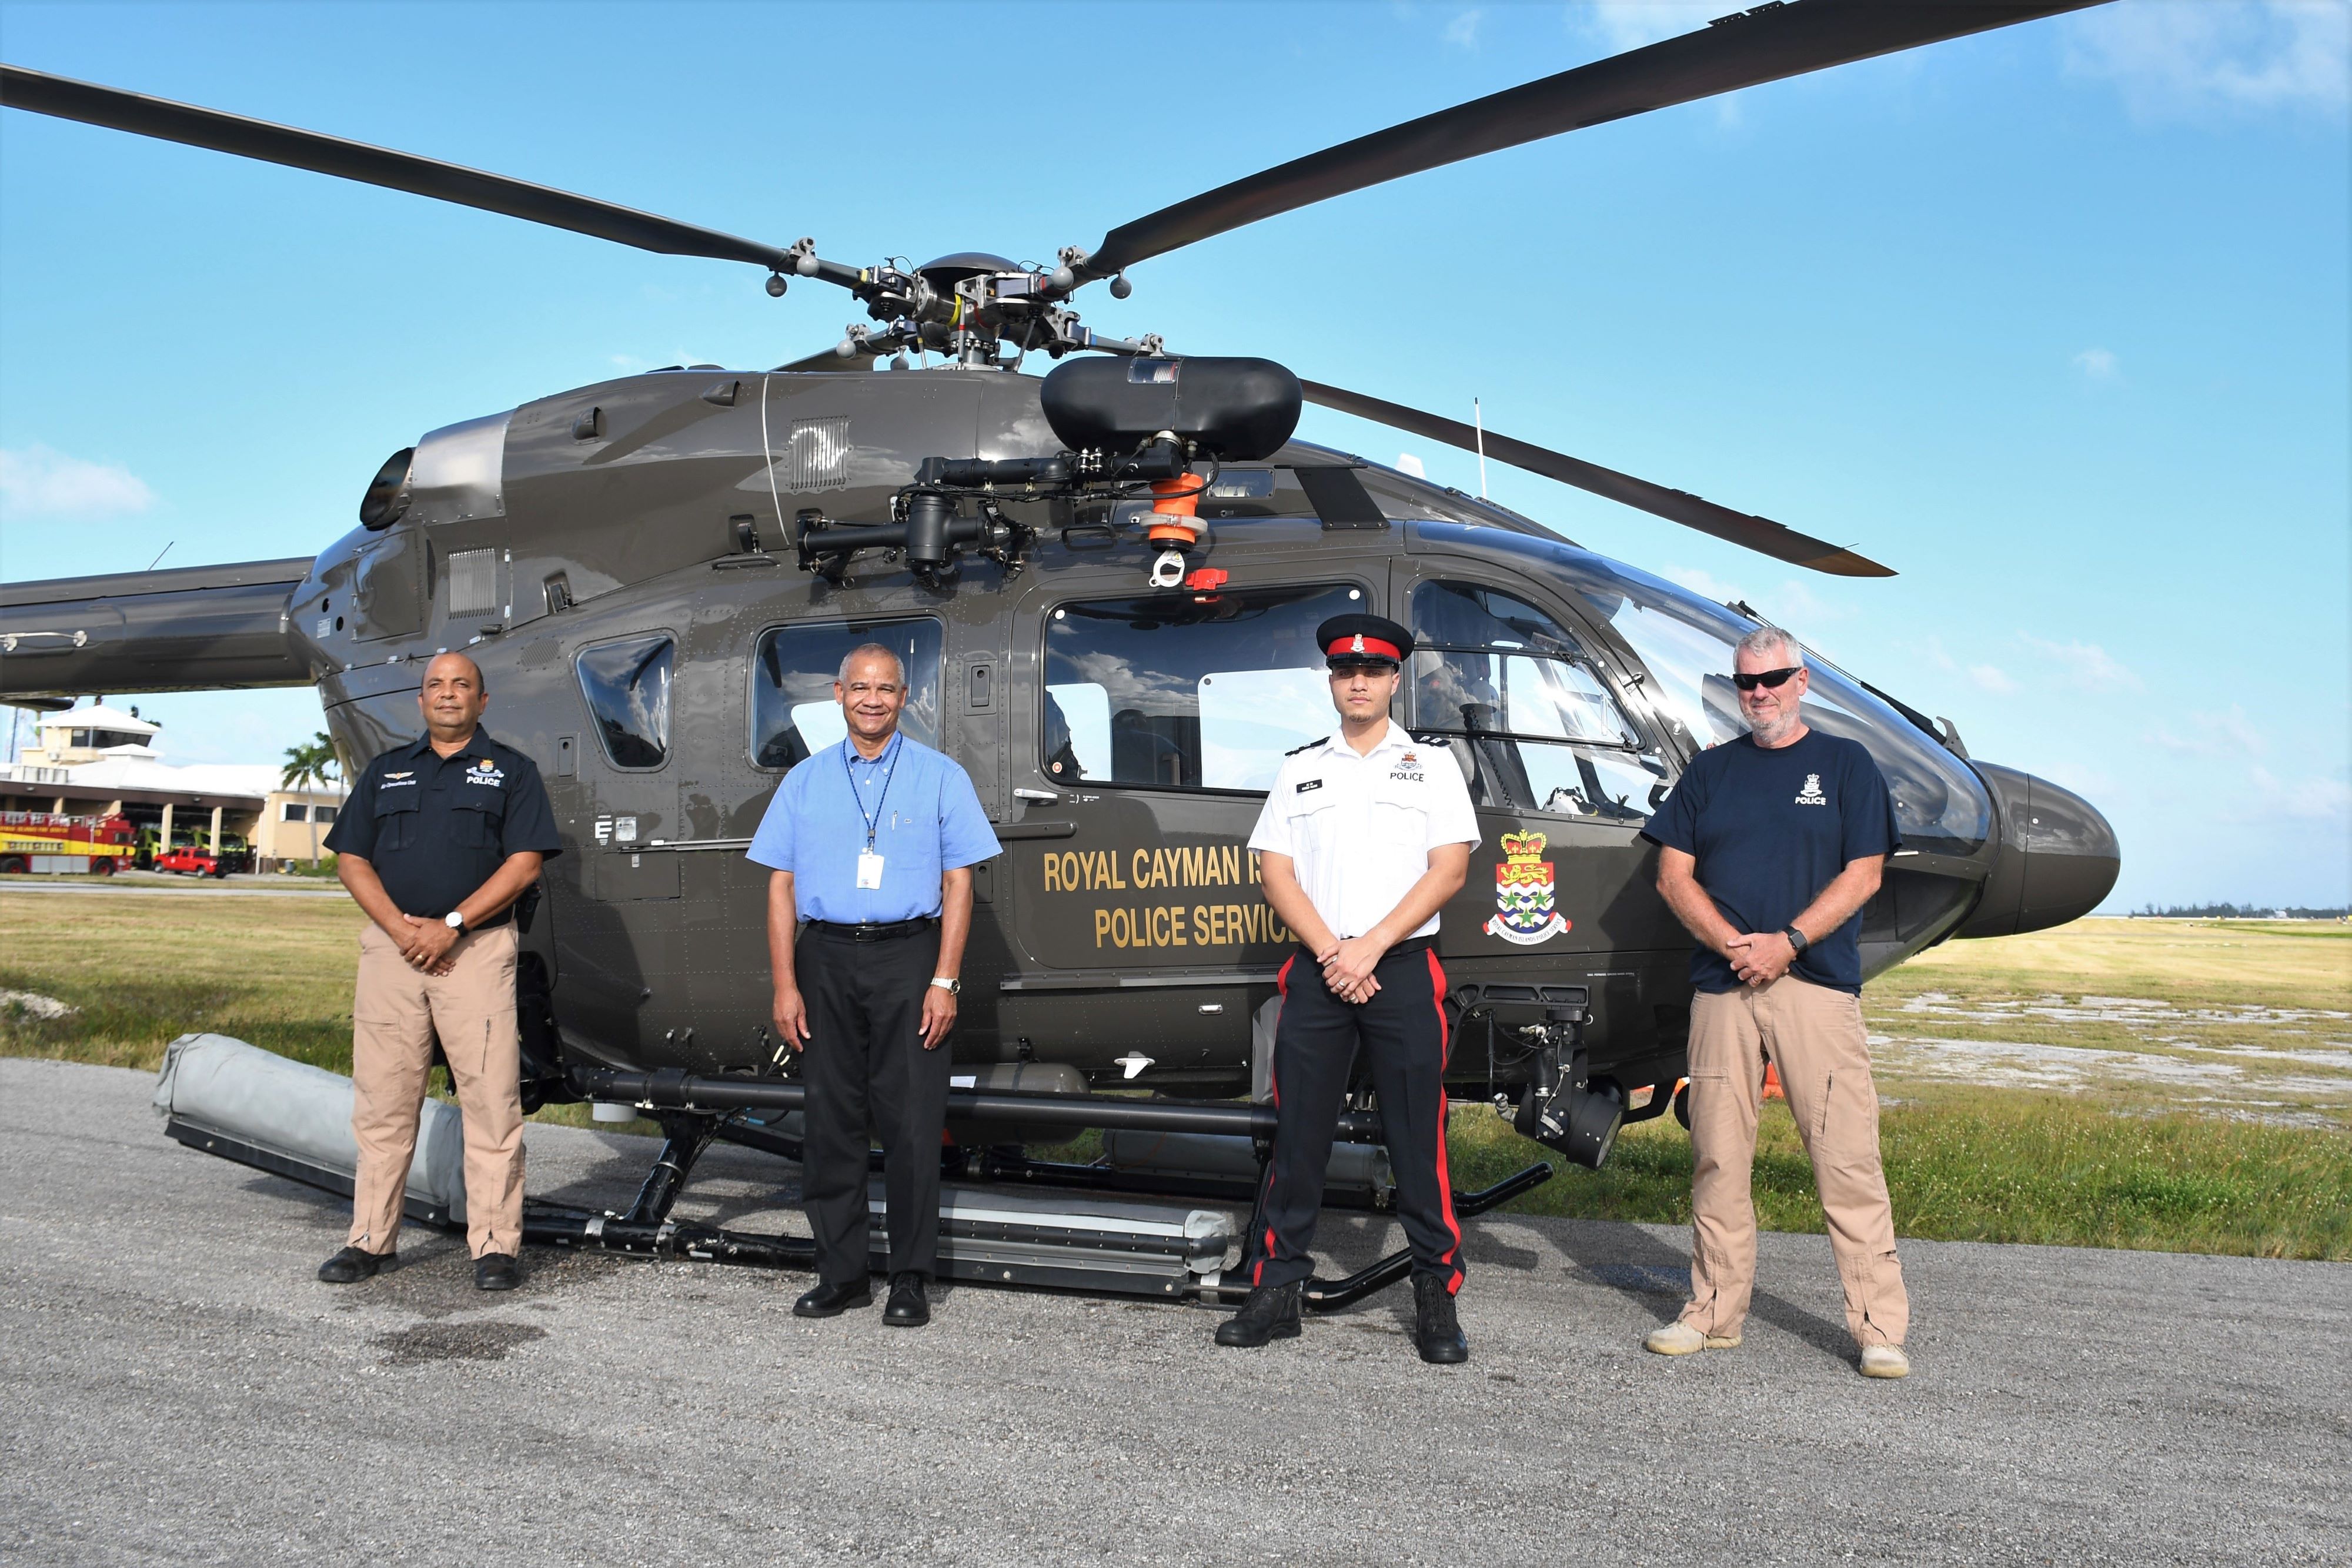 (left to right) Inspector Mohammed, Captain Miller, AC McLean, and Mr. Fitzgerald